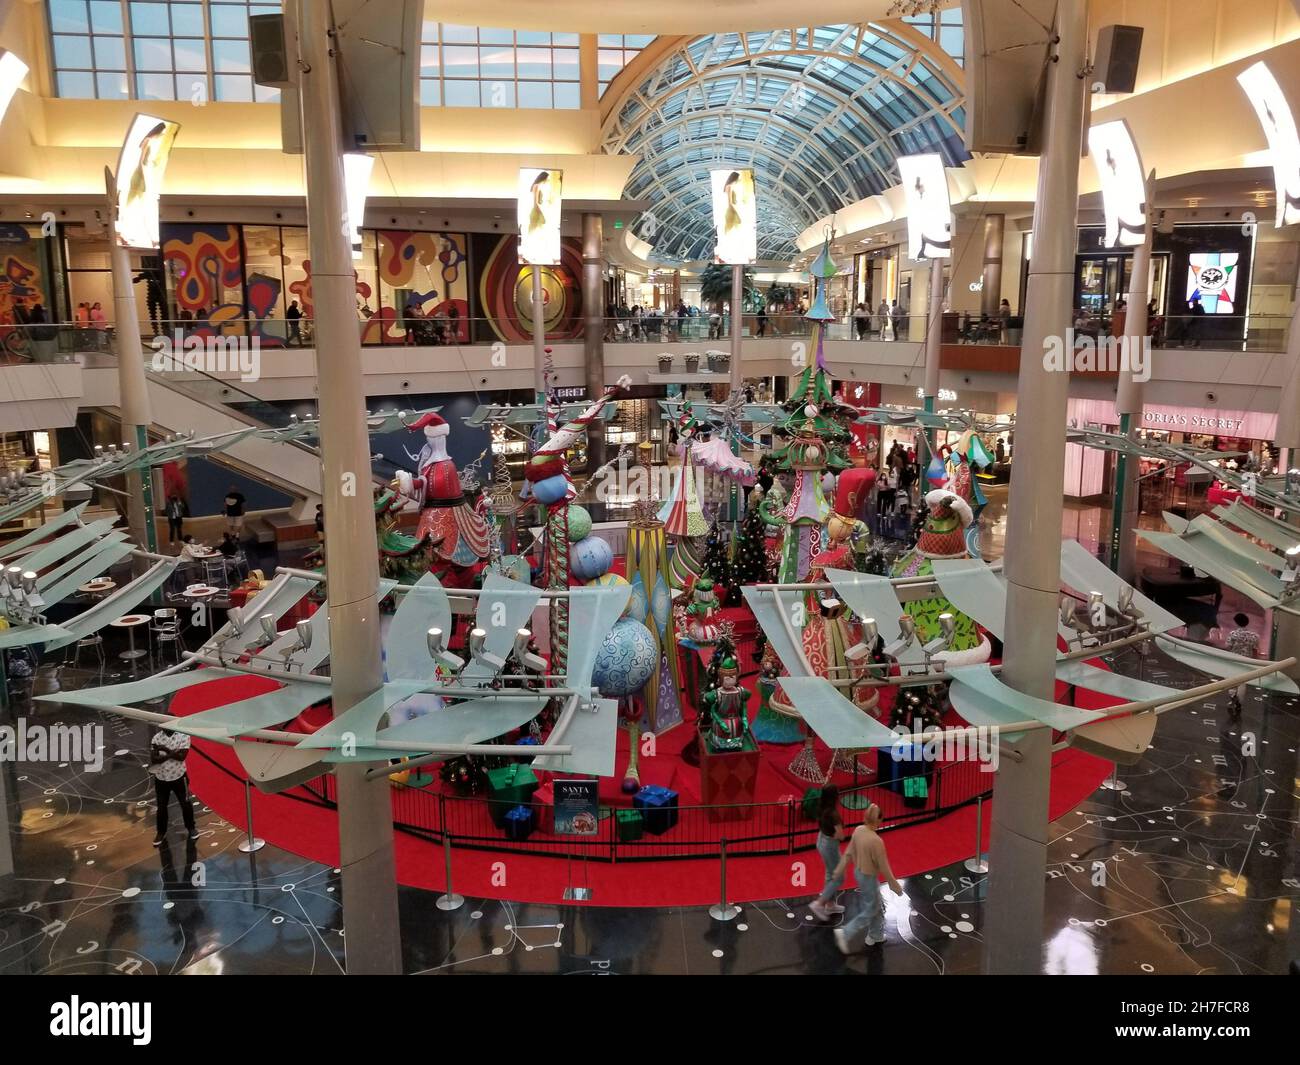 The Mall at Millenia - Millenia - 363 tips from 52034 visitors